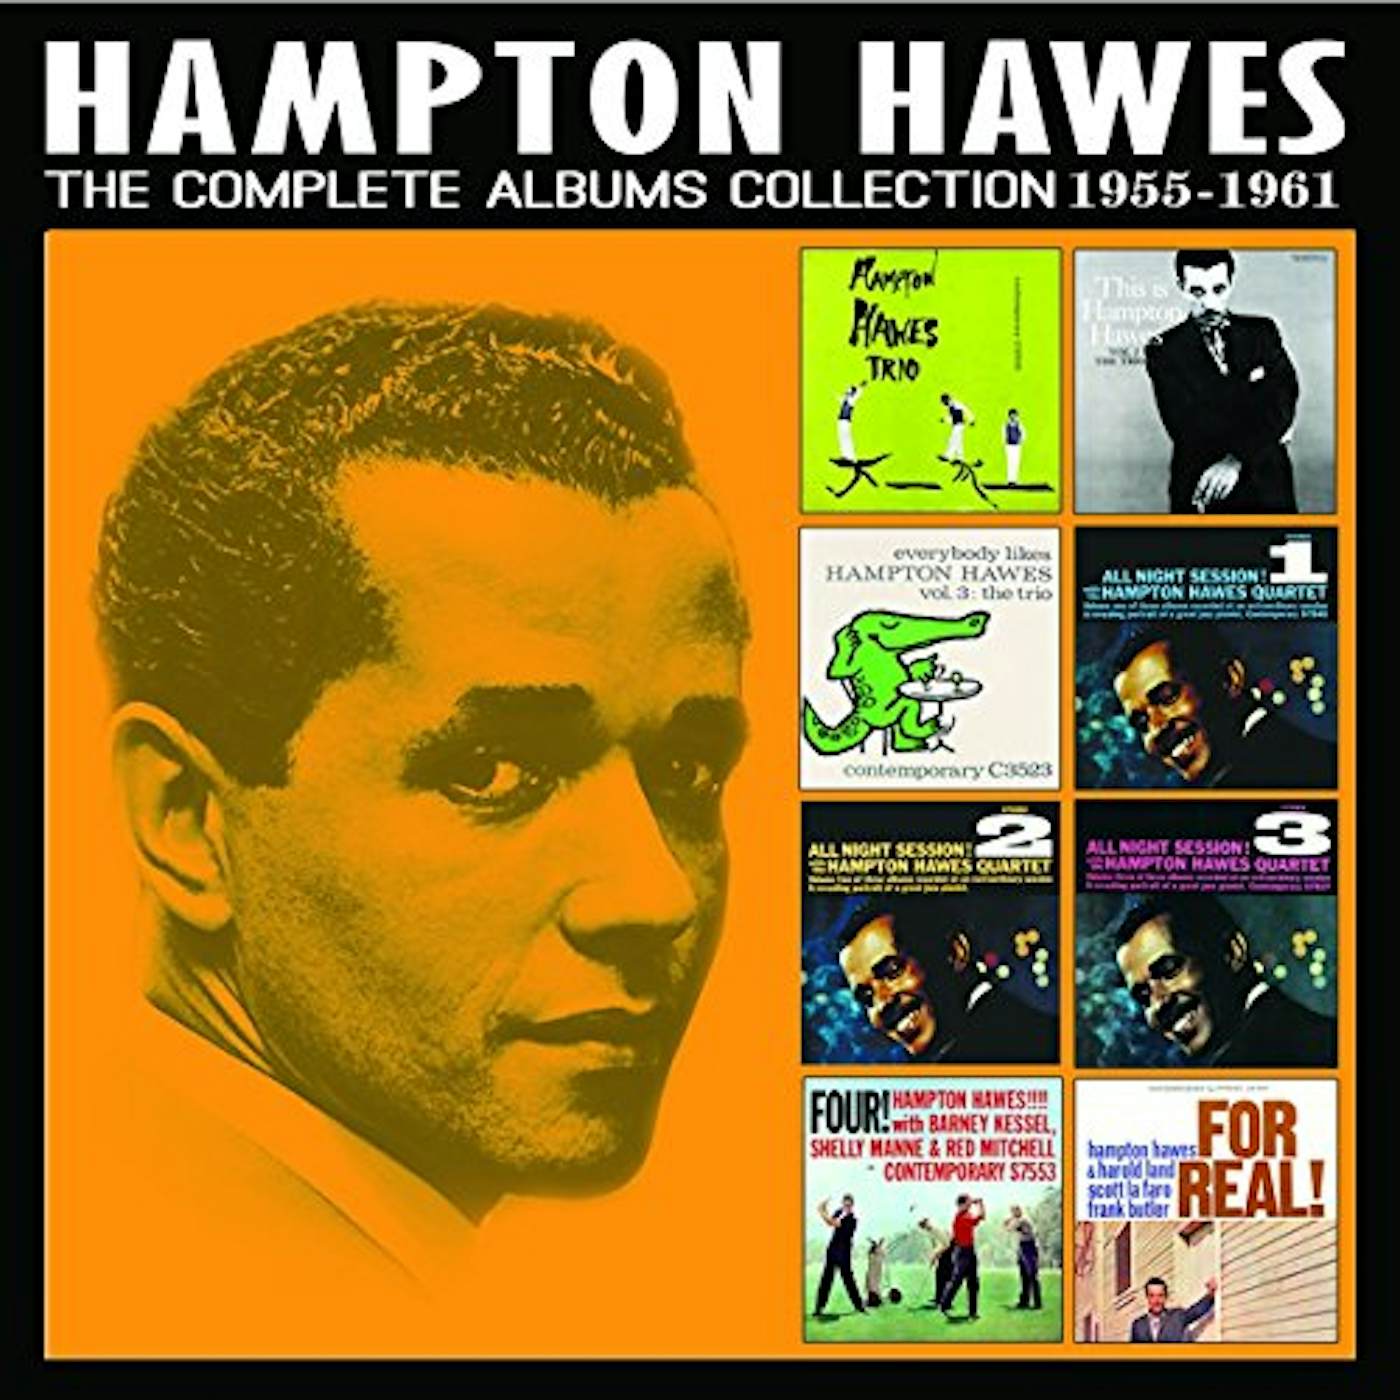 Hampton Hawes COMPLETE ALBUMS COLLECTION 1955-1961 CD